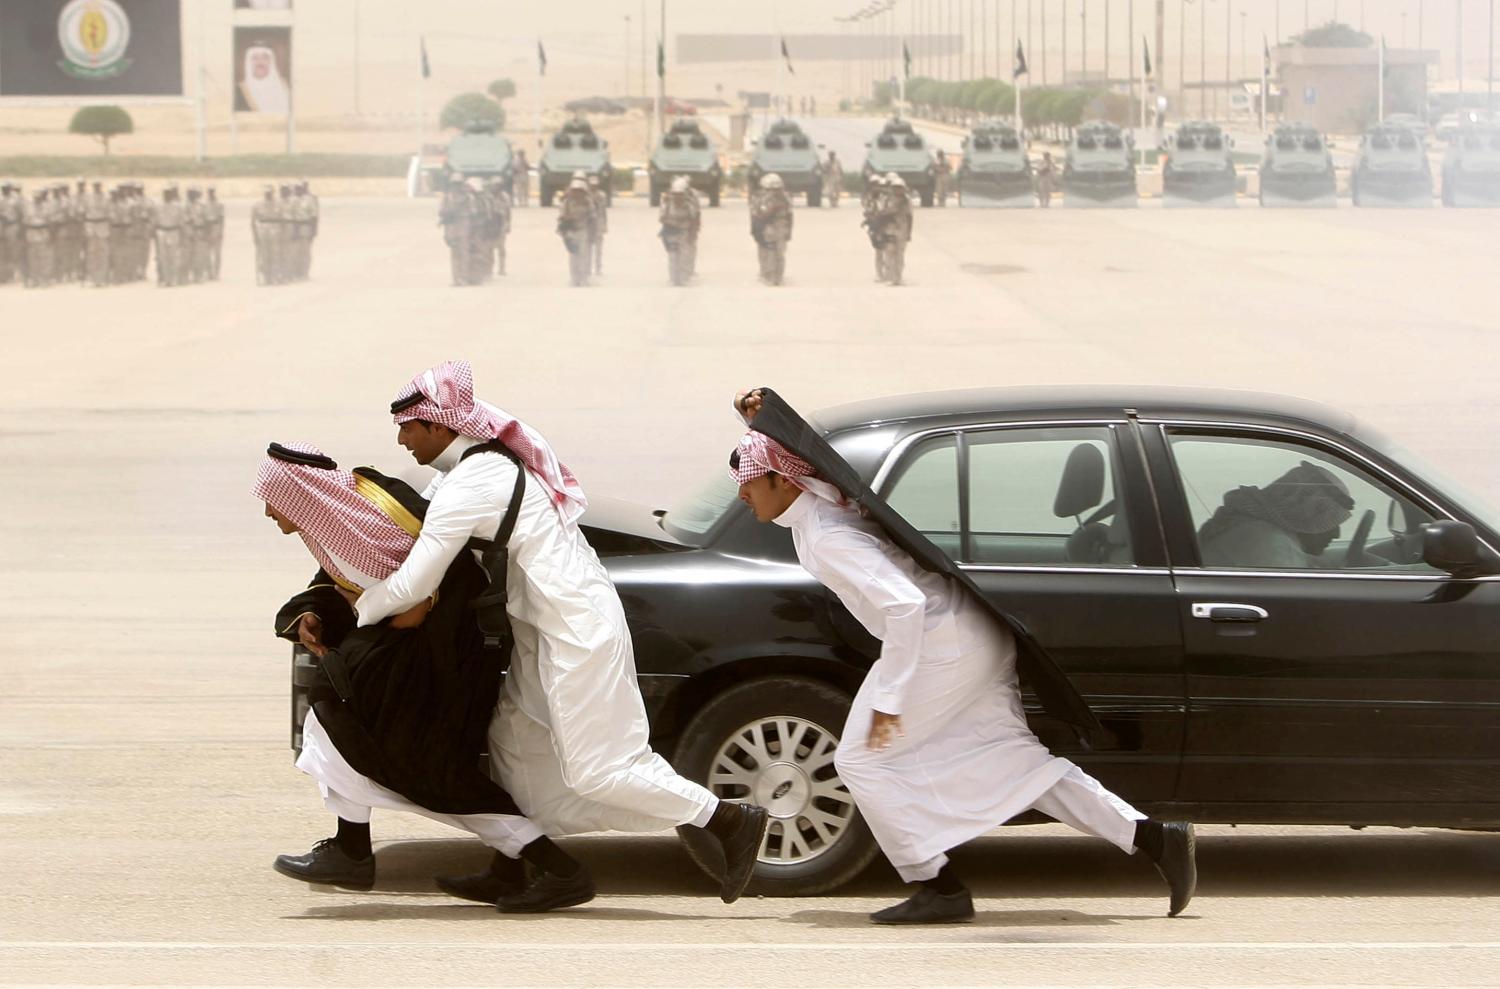 Graduating soldiers from the Saudi special forces' anti-terror unit demonstrate their skills in protecting VIPs under attack in Riyadh May 17, 2009. REUTERS/Fahad Shadeed (SAUDI ARABIA POLITICS) - RTXI8T2